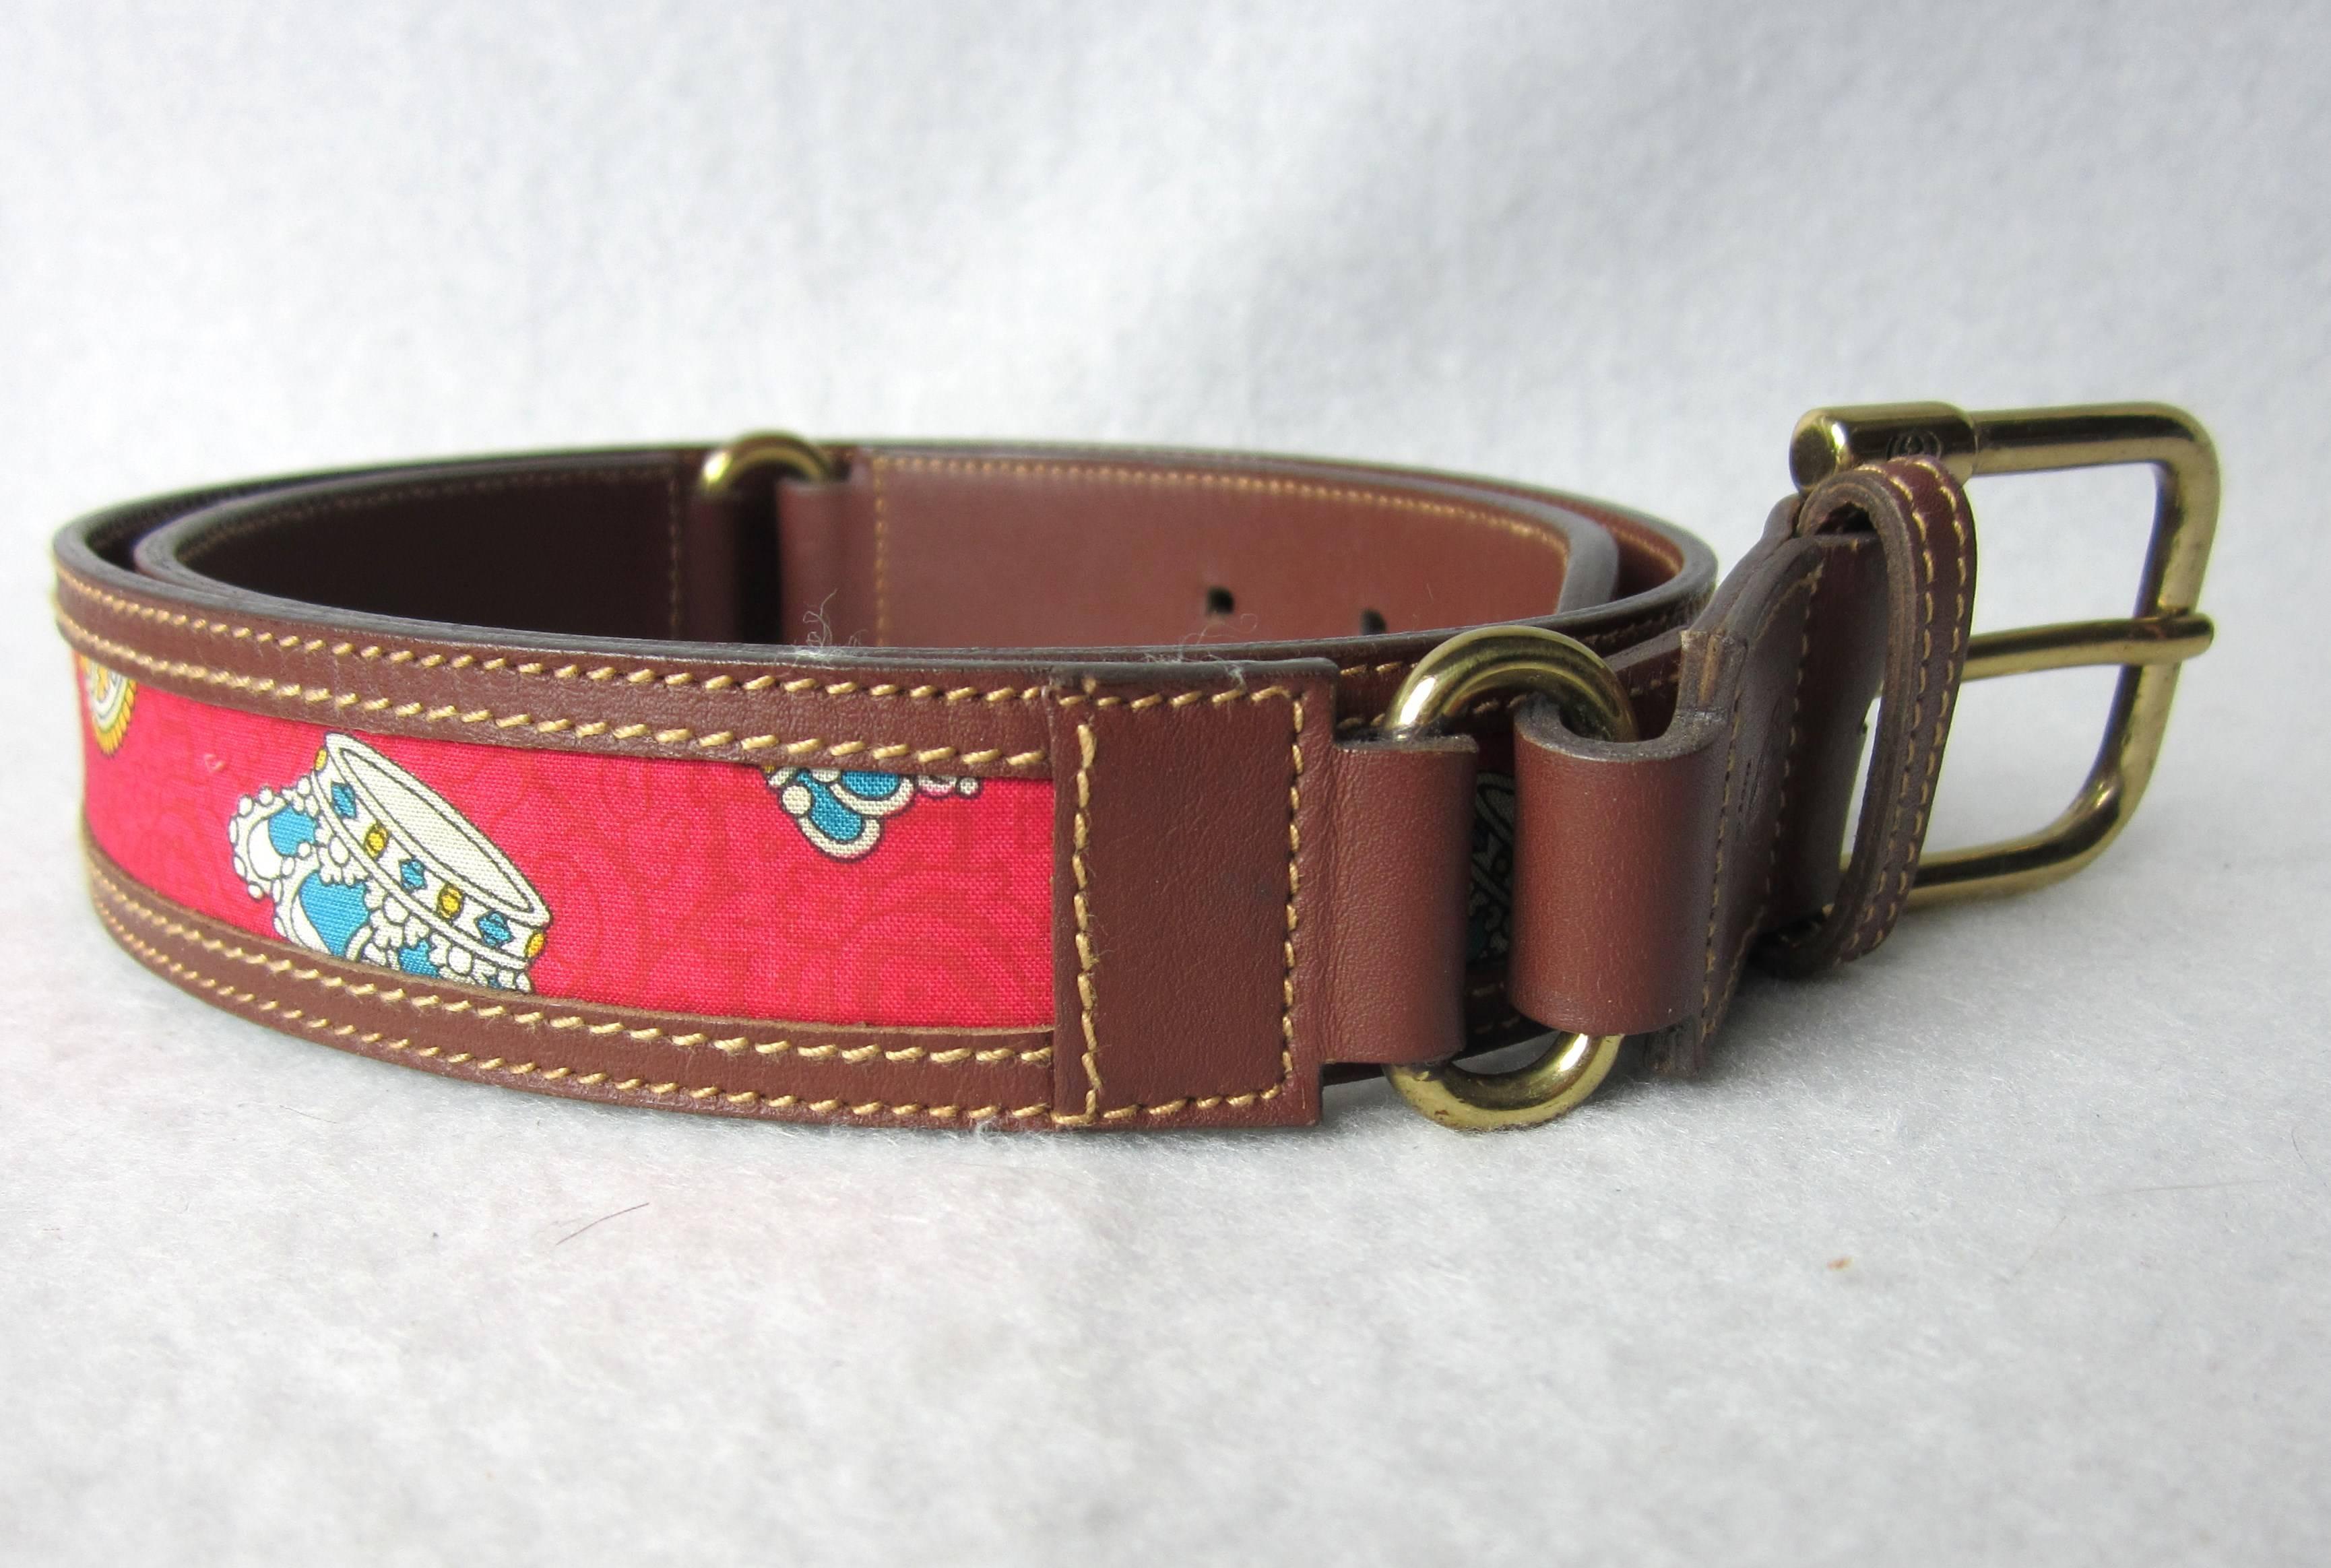 Rich brown leather with Red background material depicting a king's Crown. Labeled 85-34. Has Gold tone Hardware Measuring 1.15 inches wide. It's 35 inches long 1st belt hole at 31.5 inches. This is out of a massive collection of Contemporary Fashion